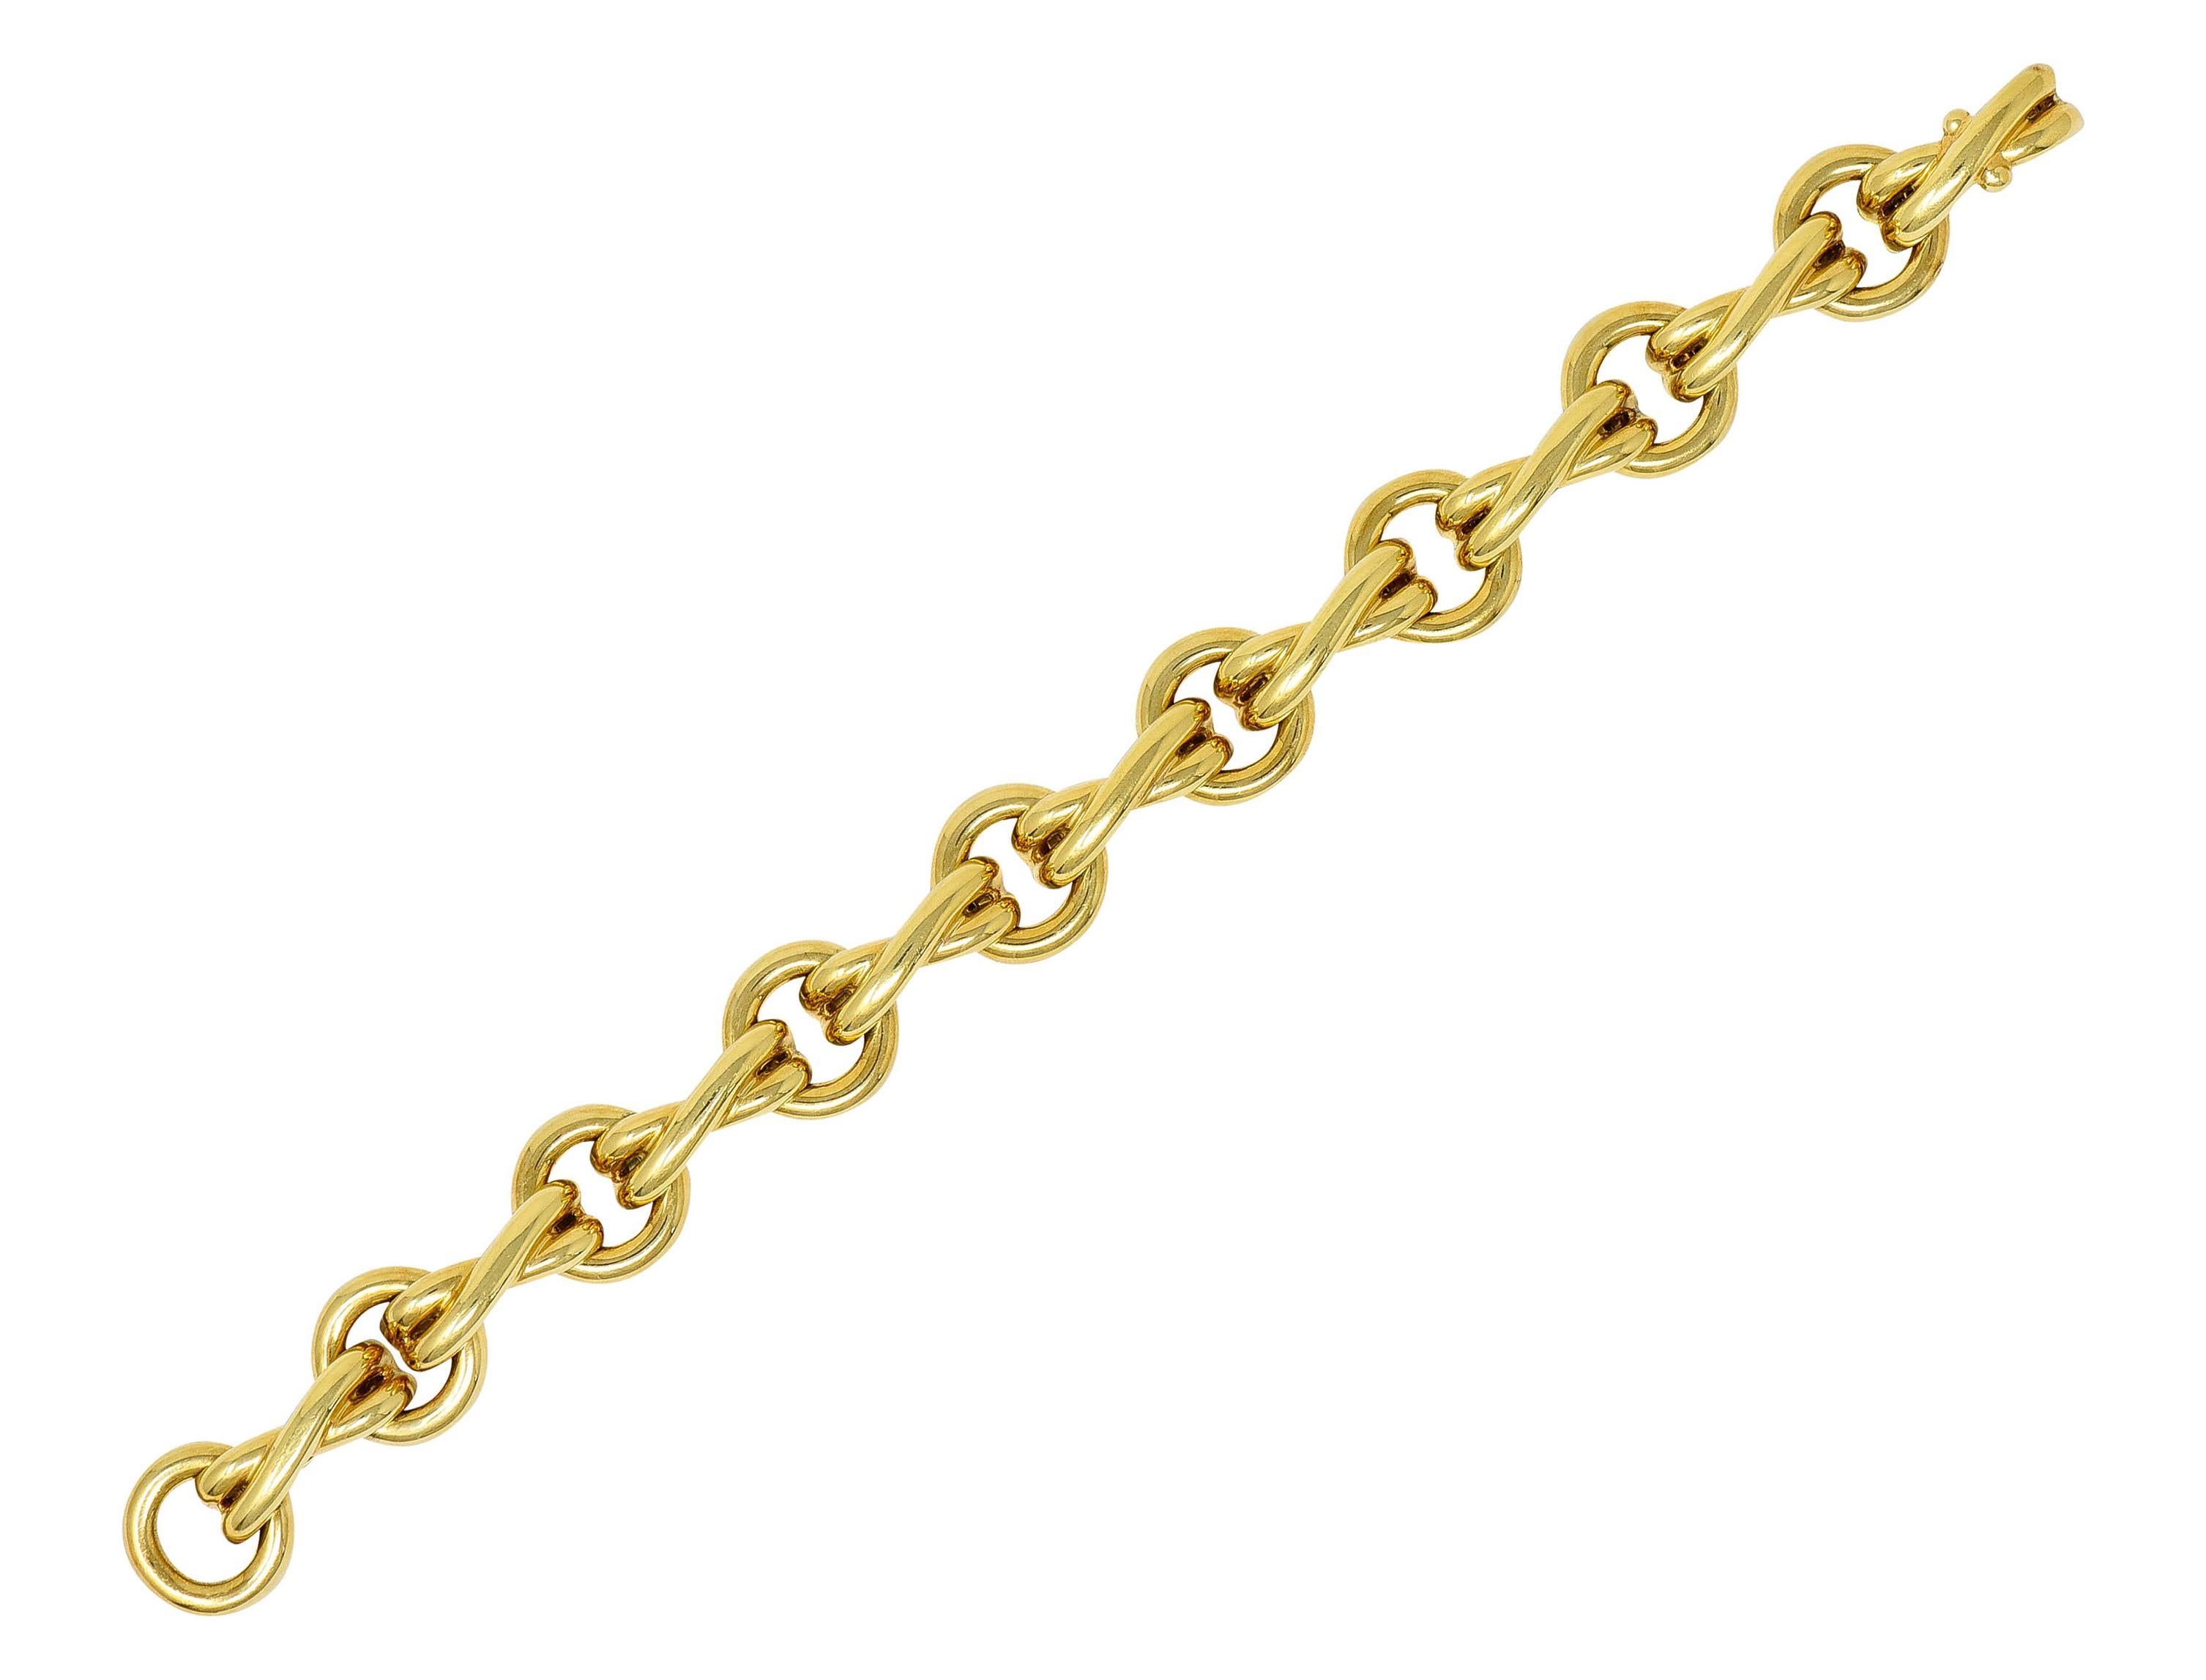 Bracelet is comprised of circular spacer links alternating with stylized X bar links

Featuring a brightly polished finish

And a concealed fold-over clasp

Stamped 750 for 18 karat gold

Fully signed Tiffany & Co. Paloma Picasso

From the Graffiti